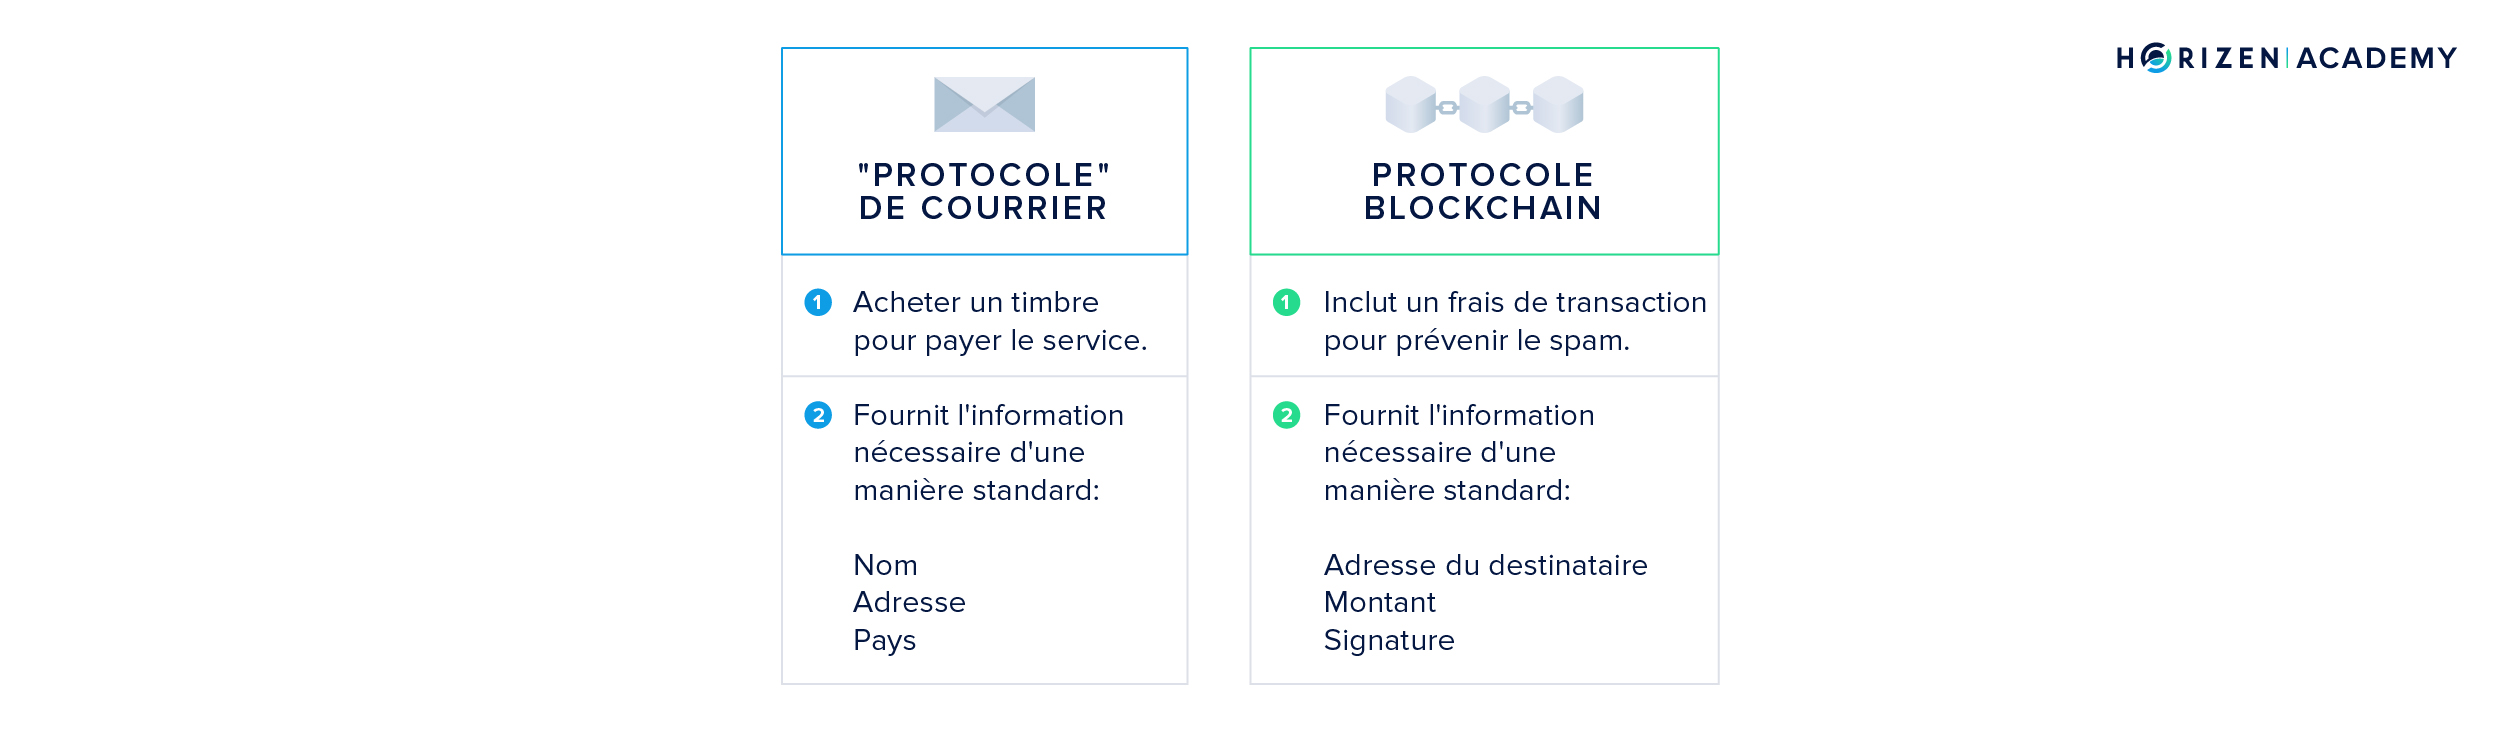 Mail protocol in FR